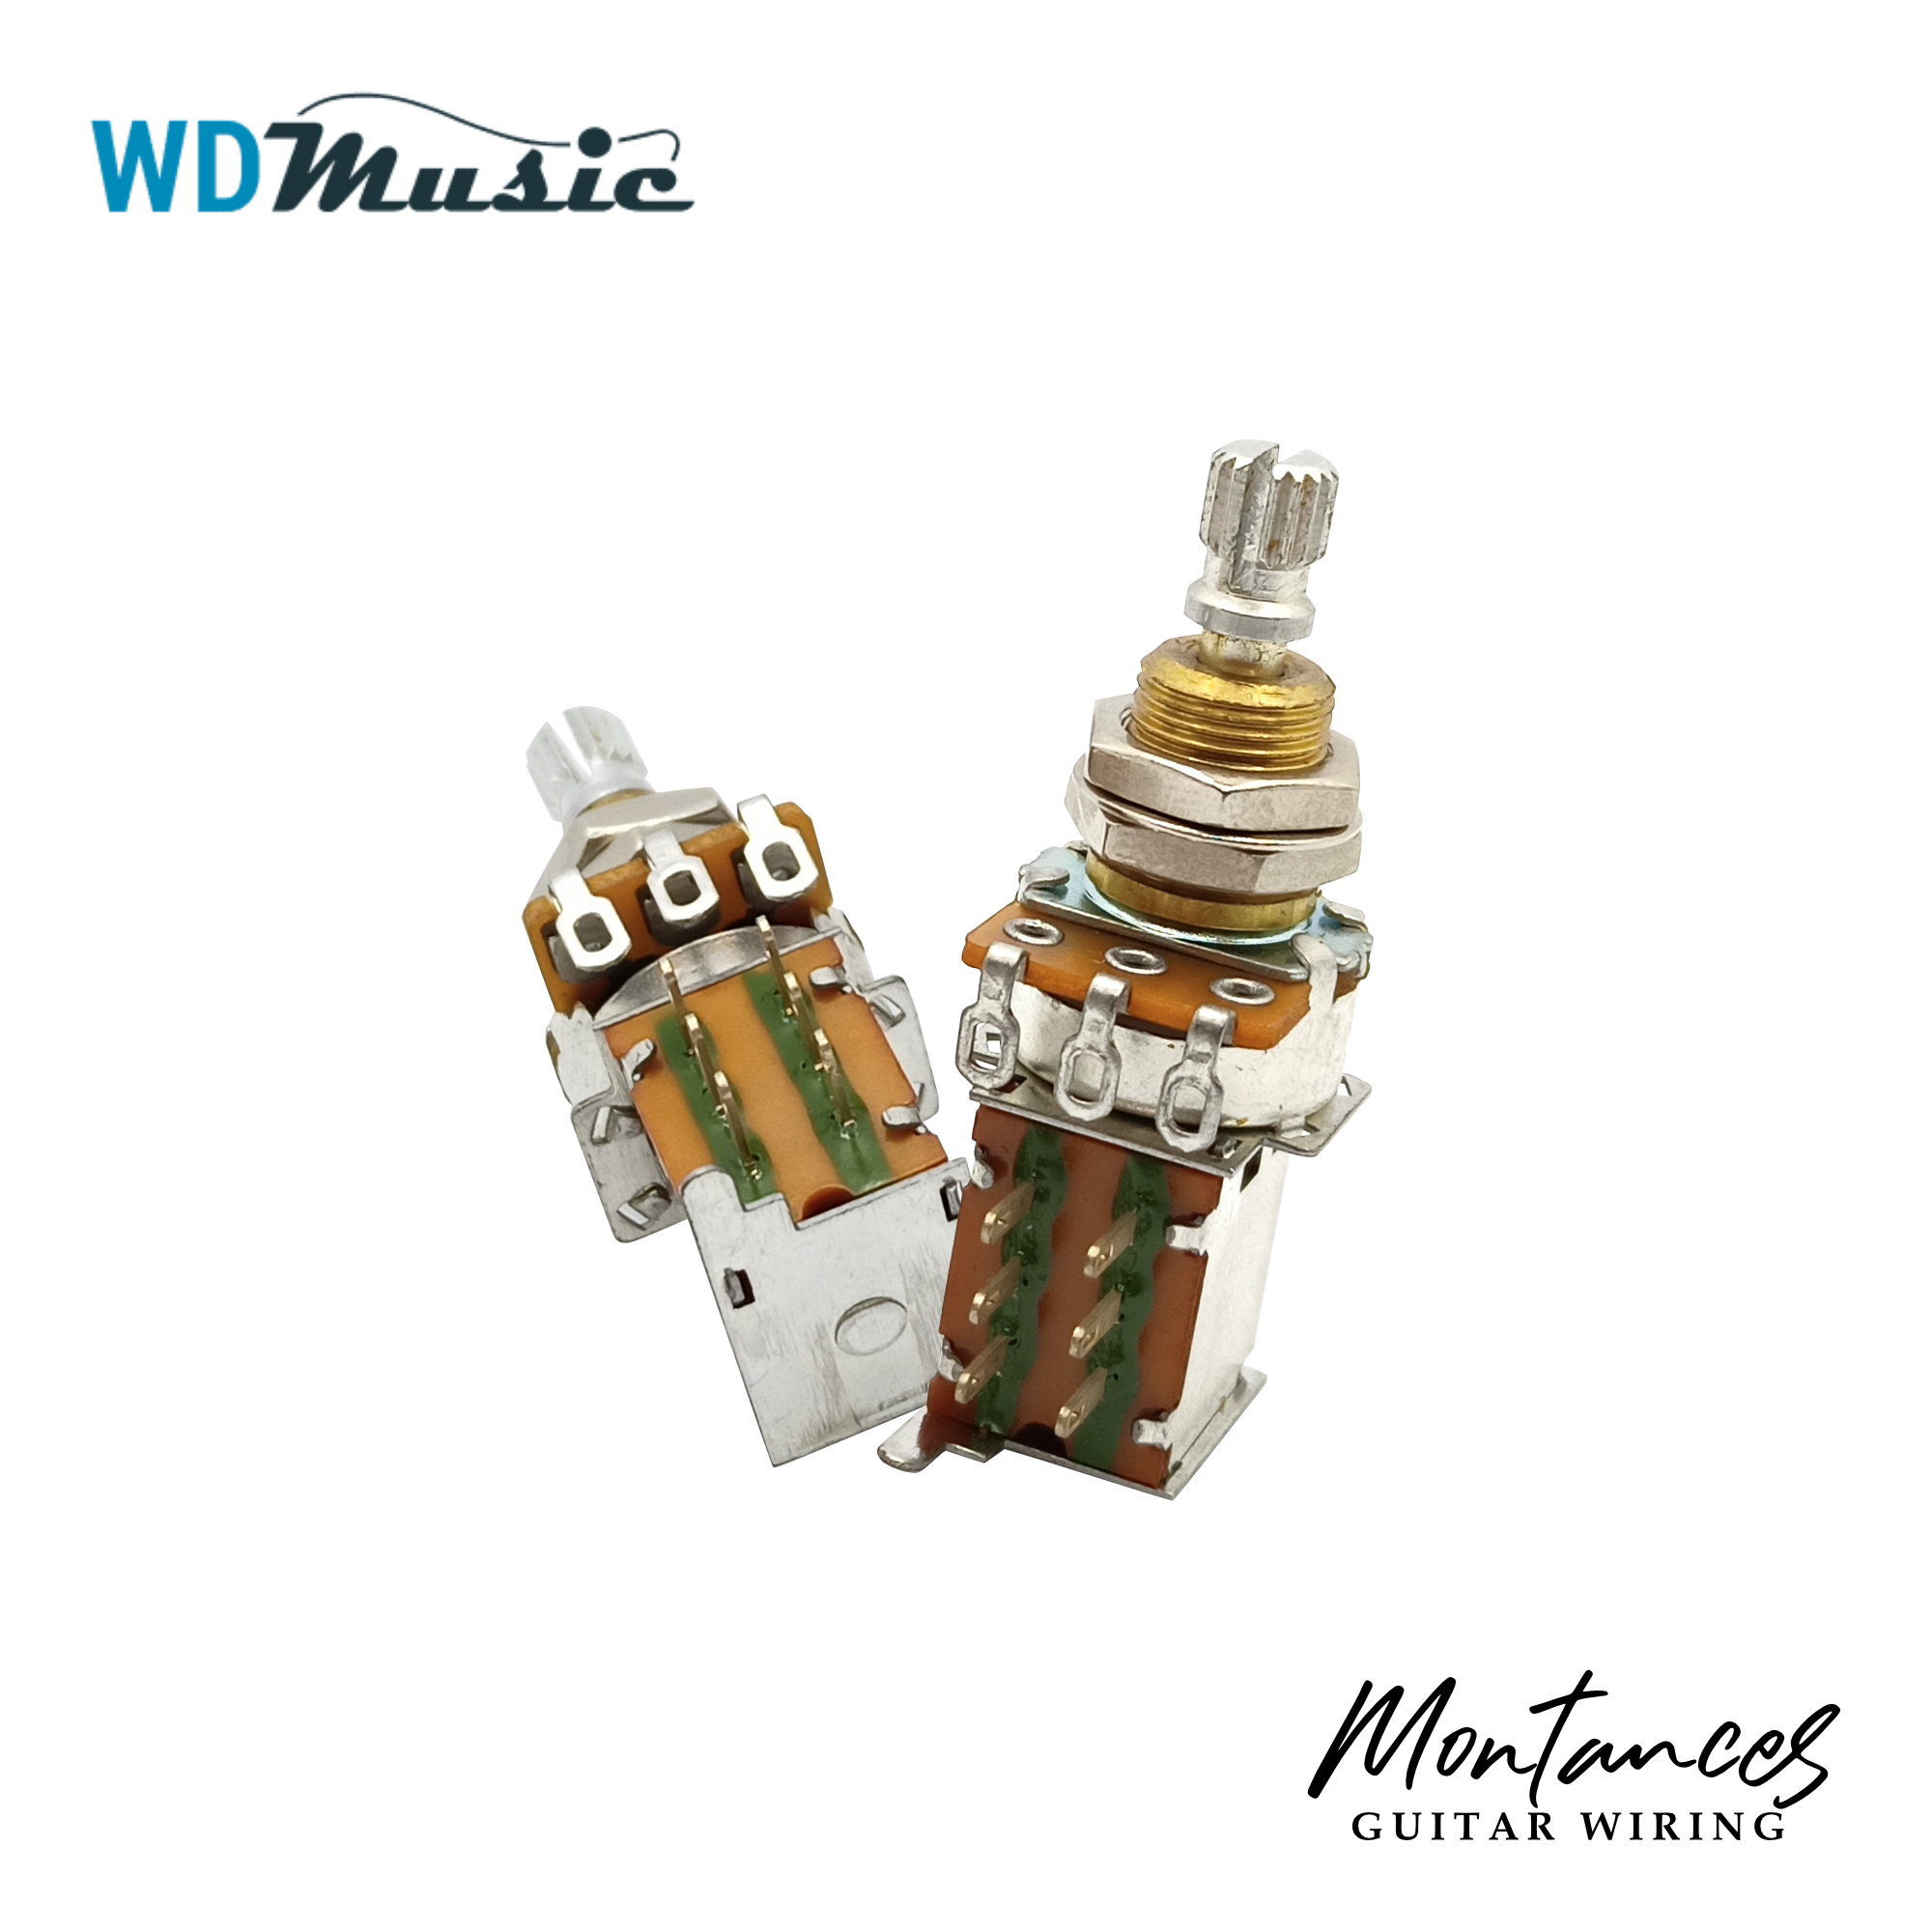 WD® ⅜” Standard Length Push Push Potentiometer Made in USA